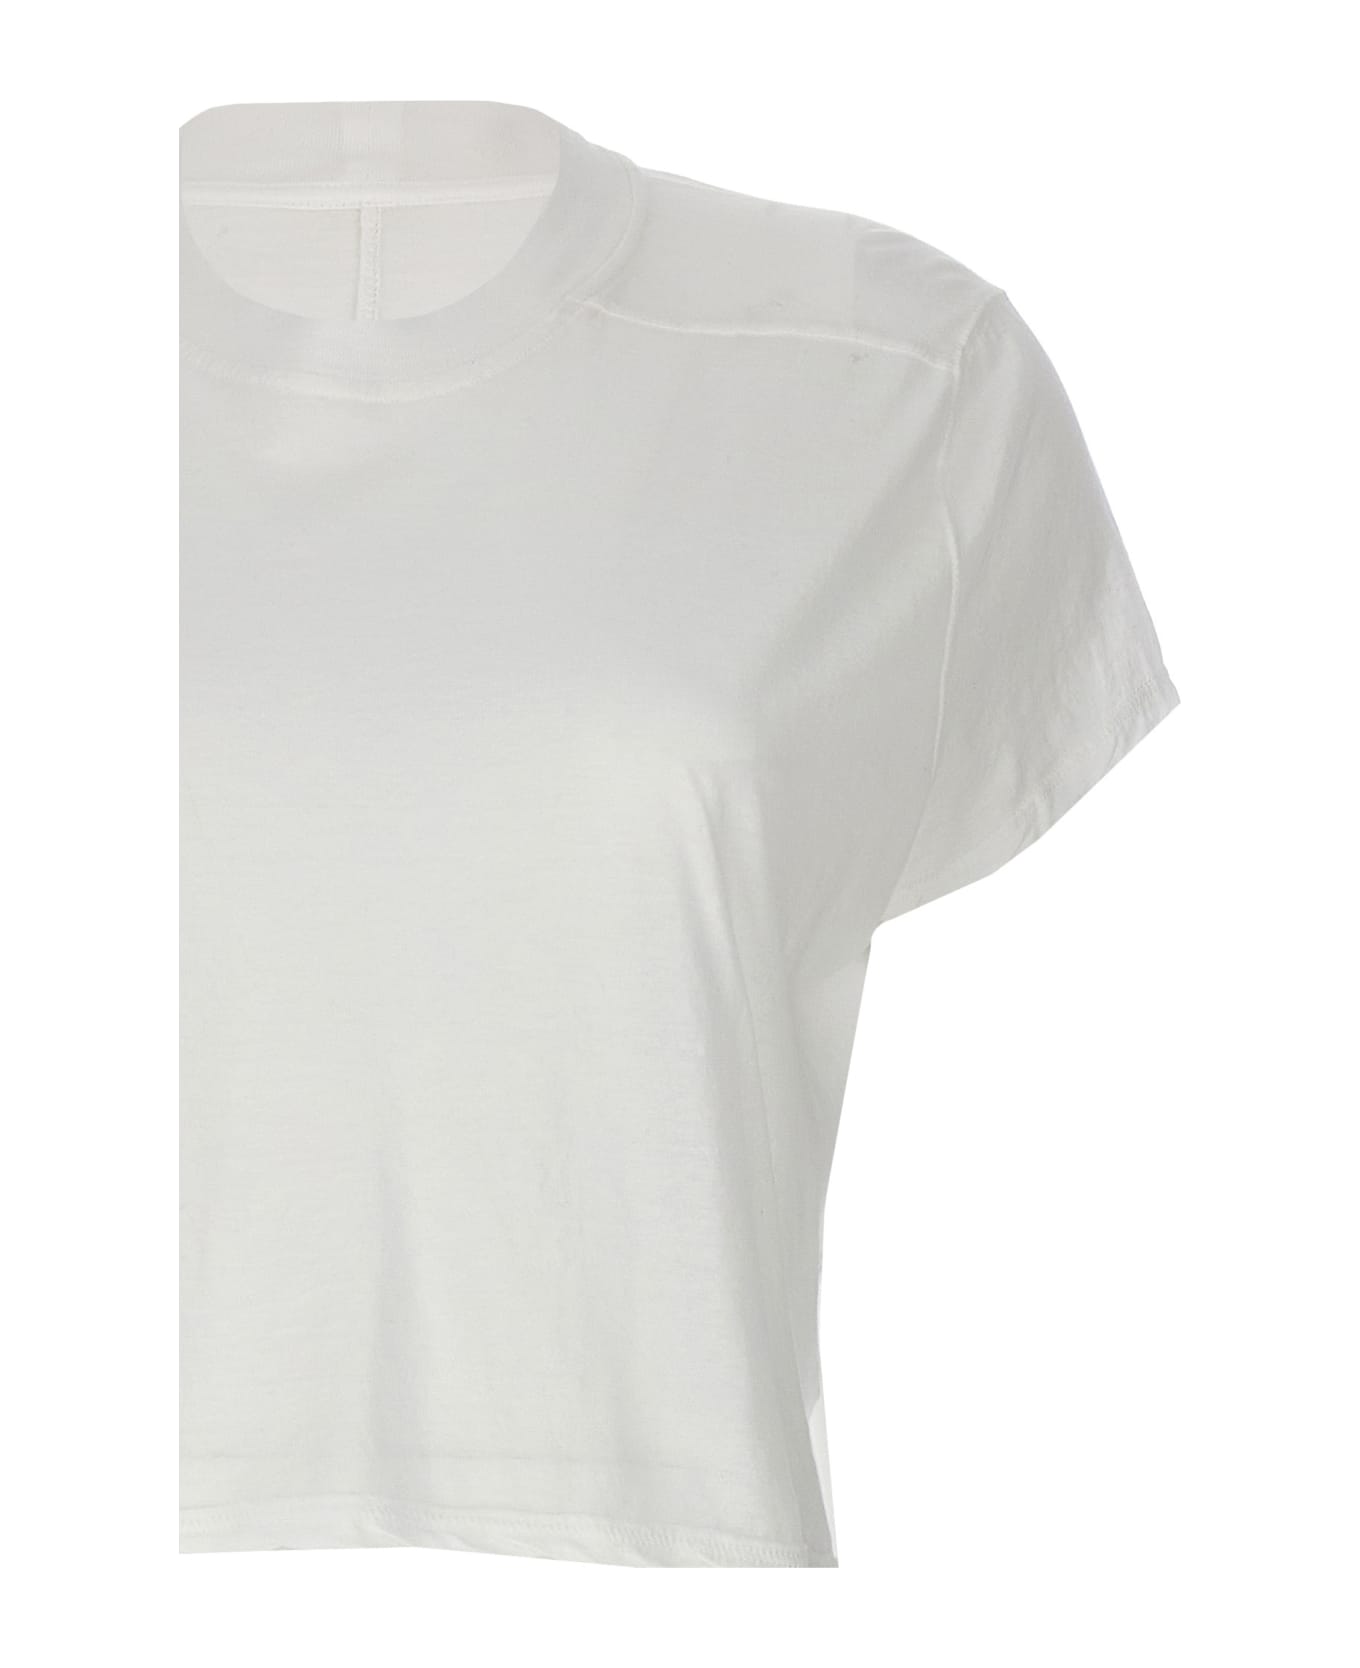 DRKSHDW 'cropped Small Level T' T-shirt - White